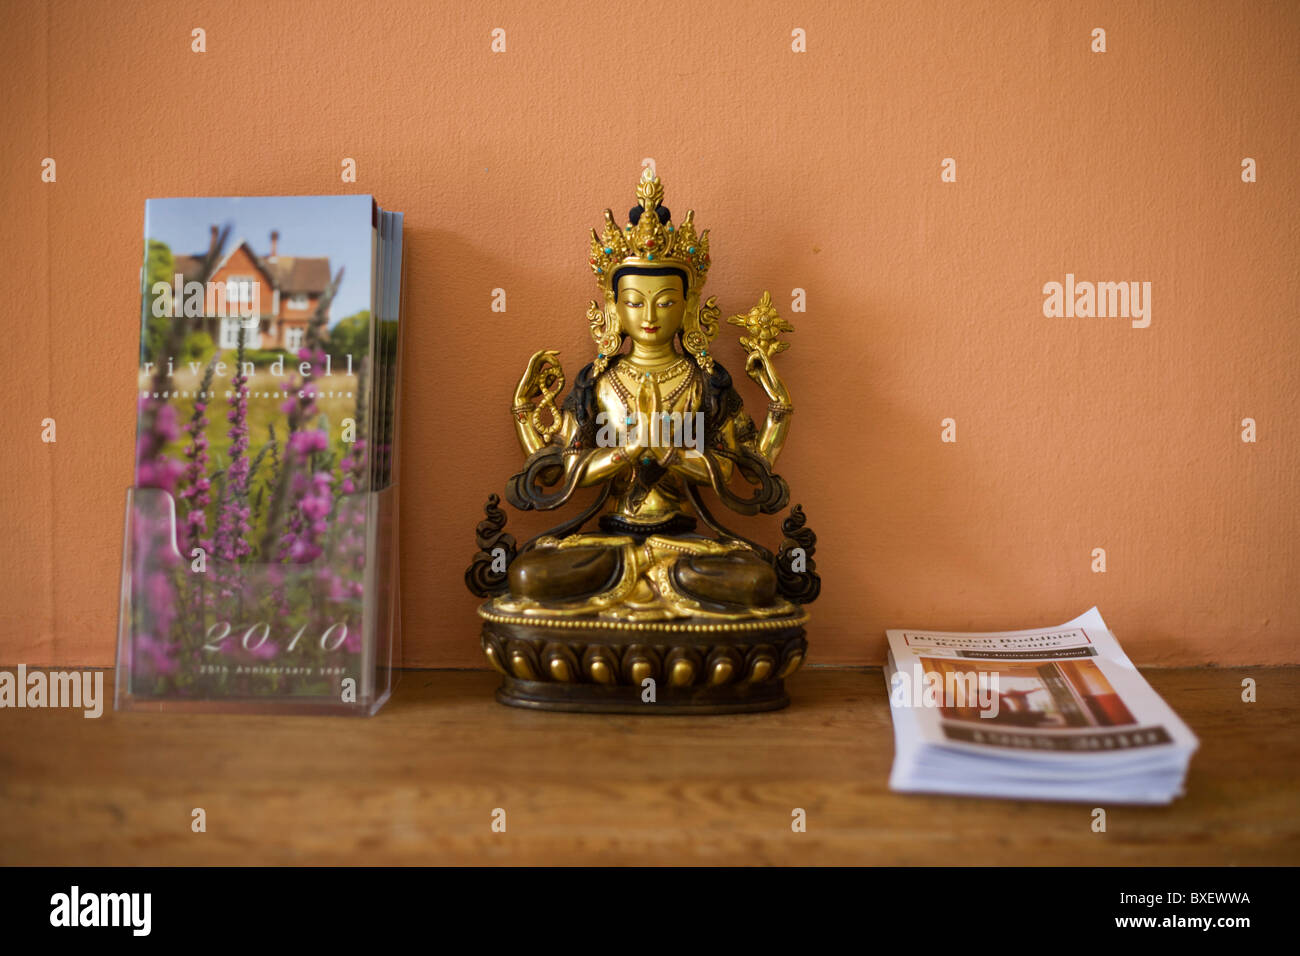 Buddha icon and brochures on ledge at the Rivendell Buddhist Retreat Centre, East Sussex, England. Stock Photo